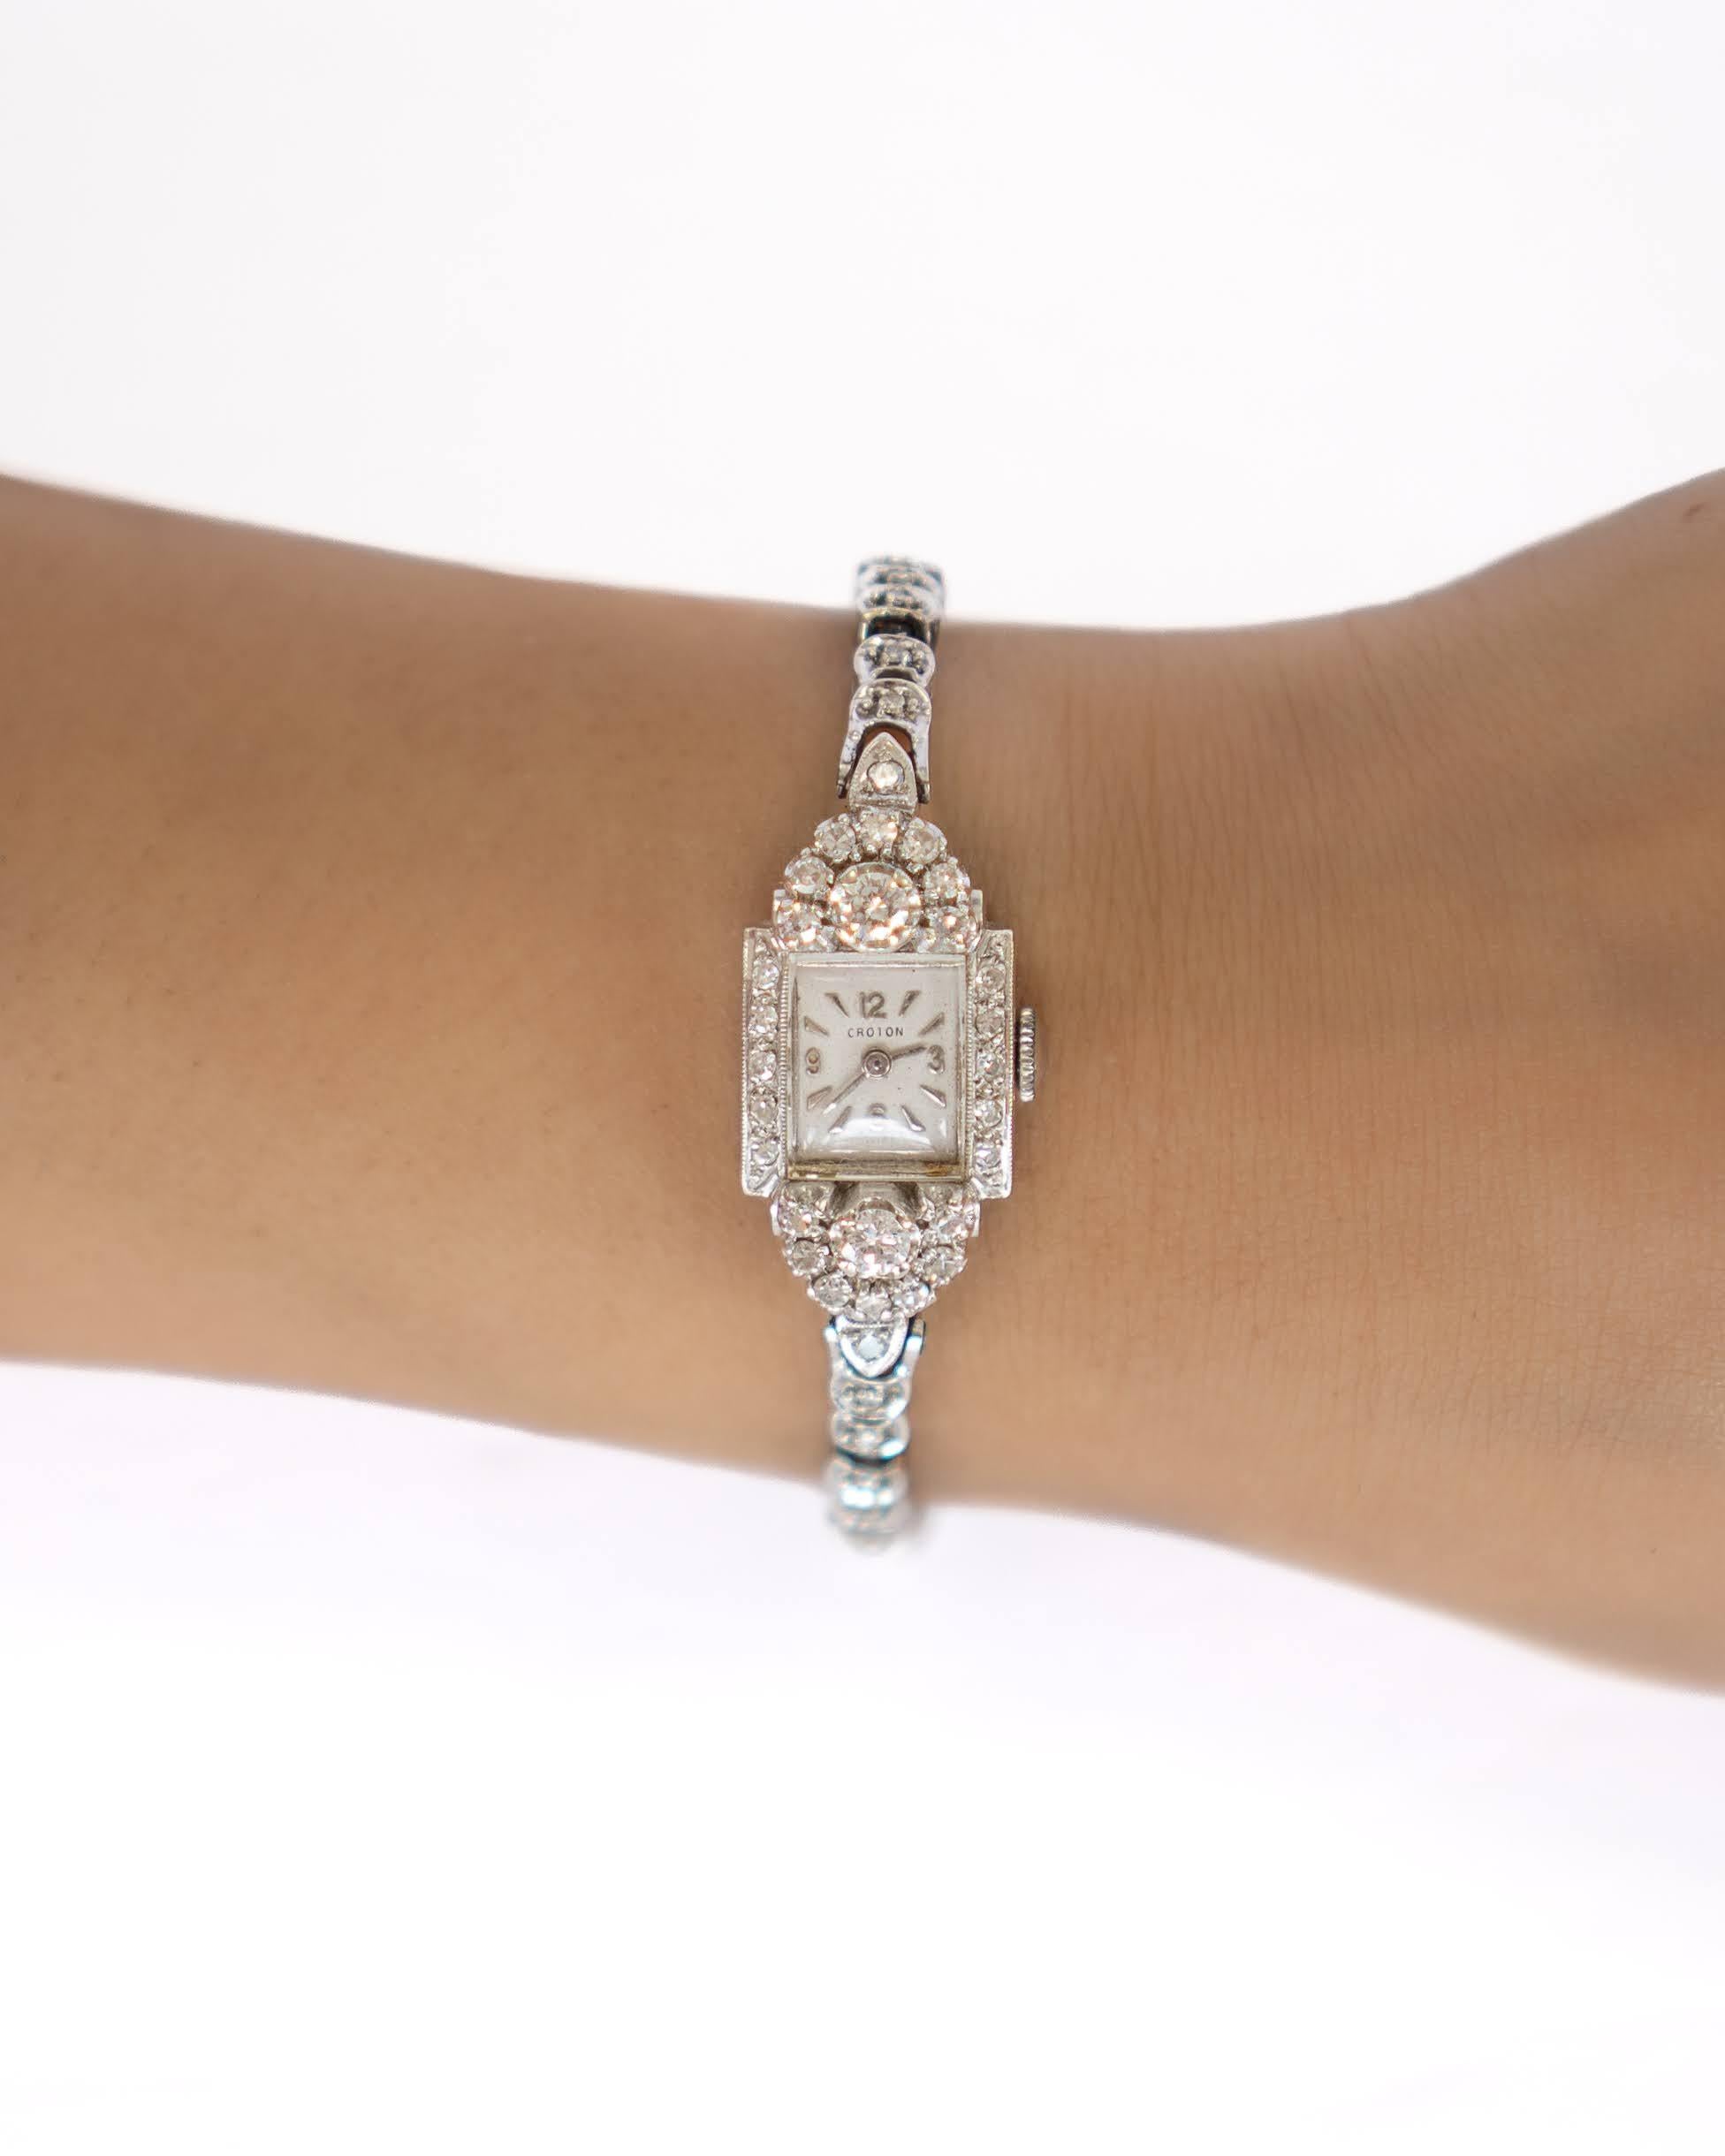 A stunning Ladies true vintage 14k white gold croton diamond watch.
The vintage patina look is something that is desired by majority of vintage jewelry buyers. We are happy to do a complimentary full polish on this watch upon request.

Brand: